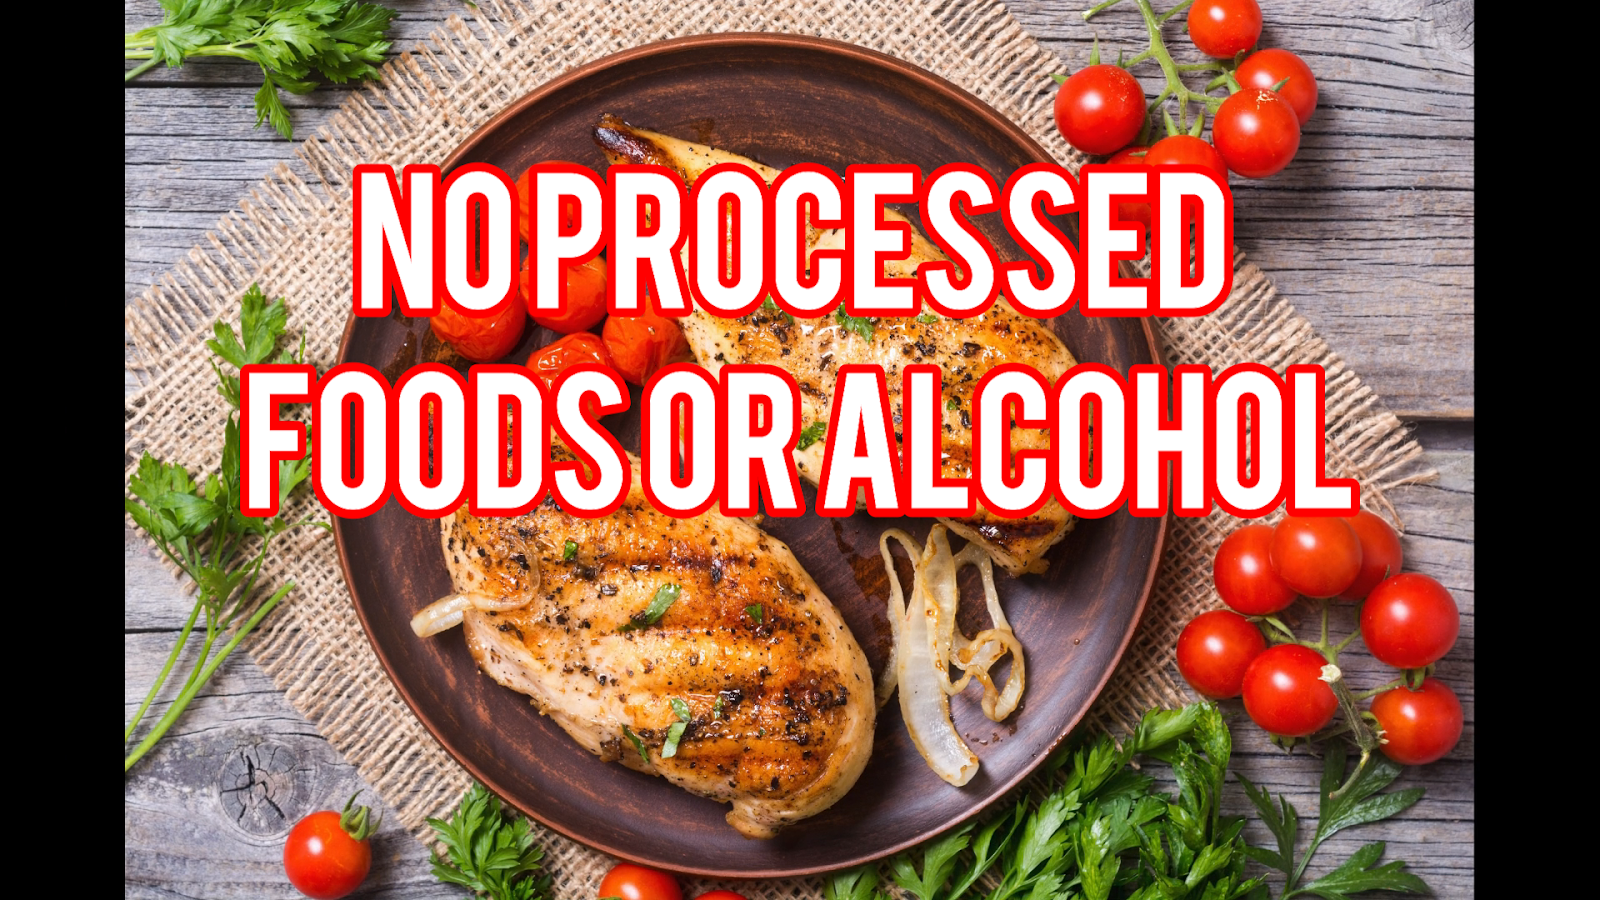 Eliminating processed foods and alcohol are key to gaining muscle and feeling better